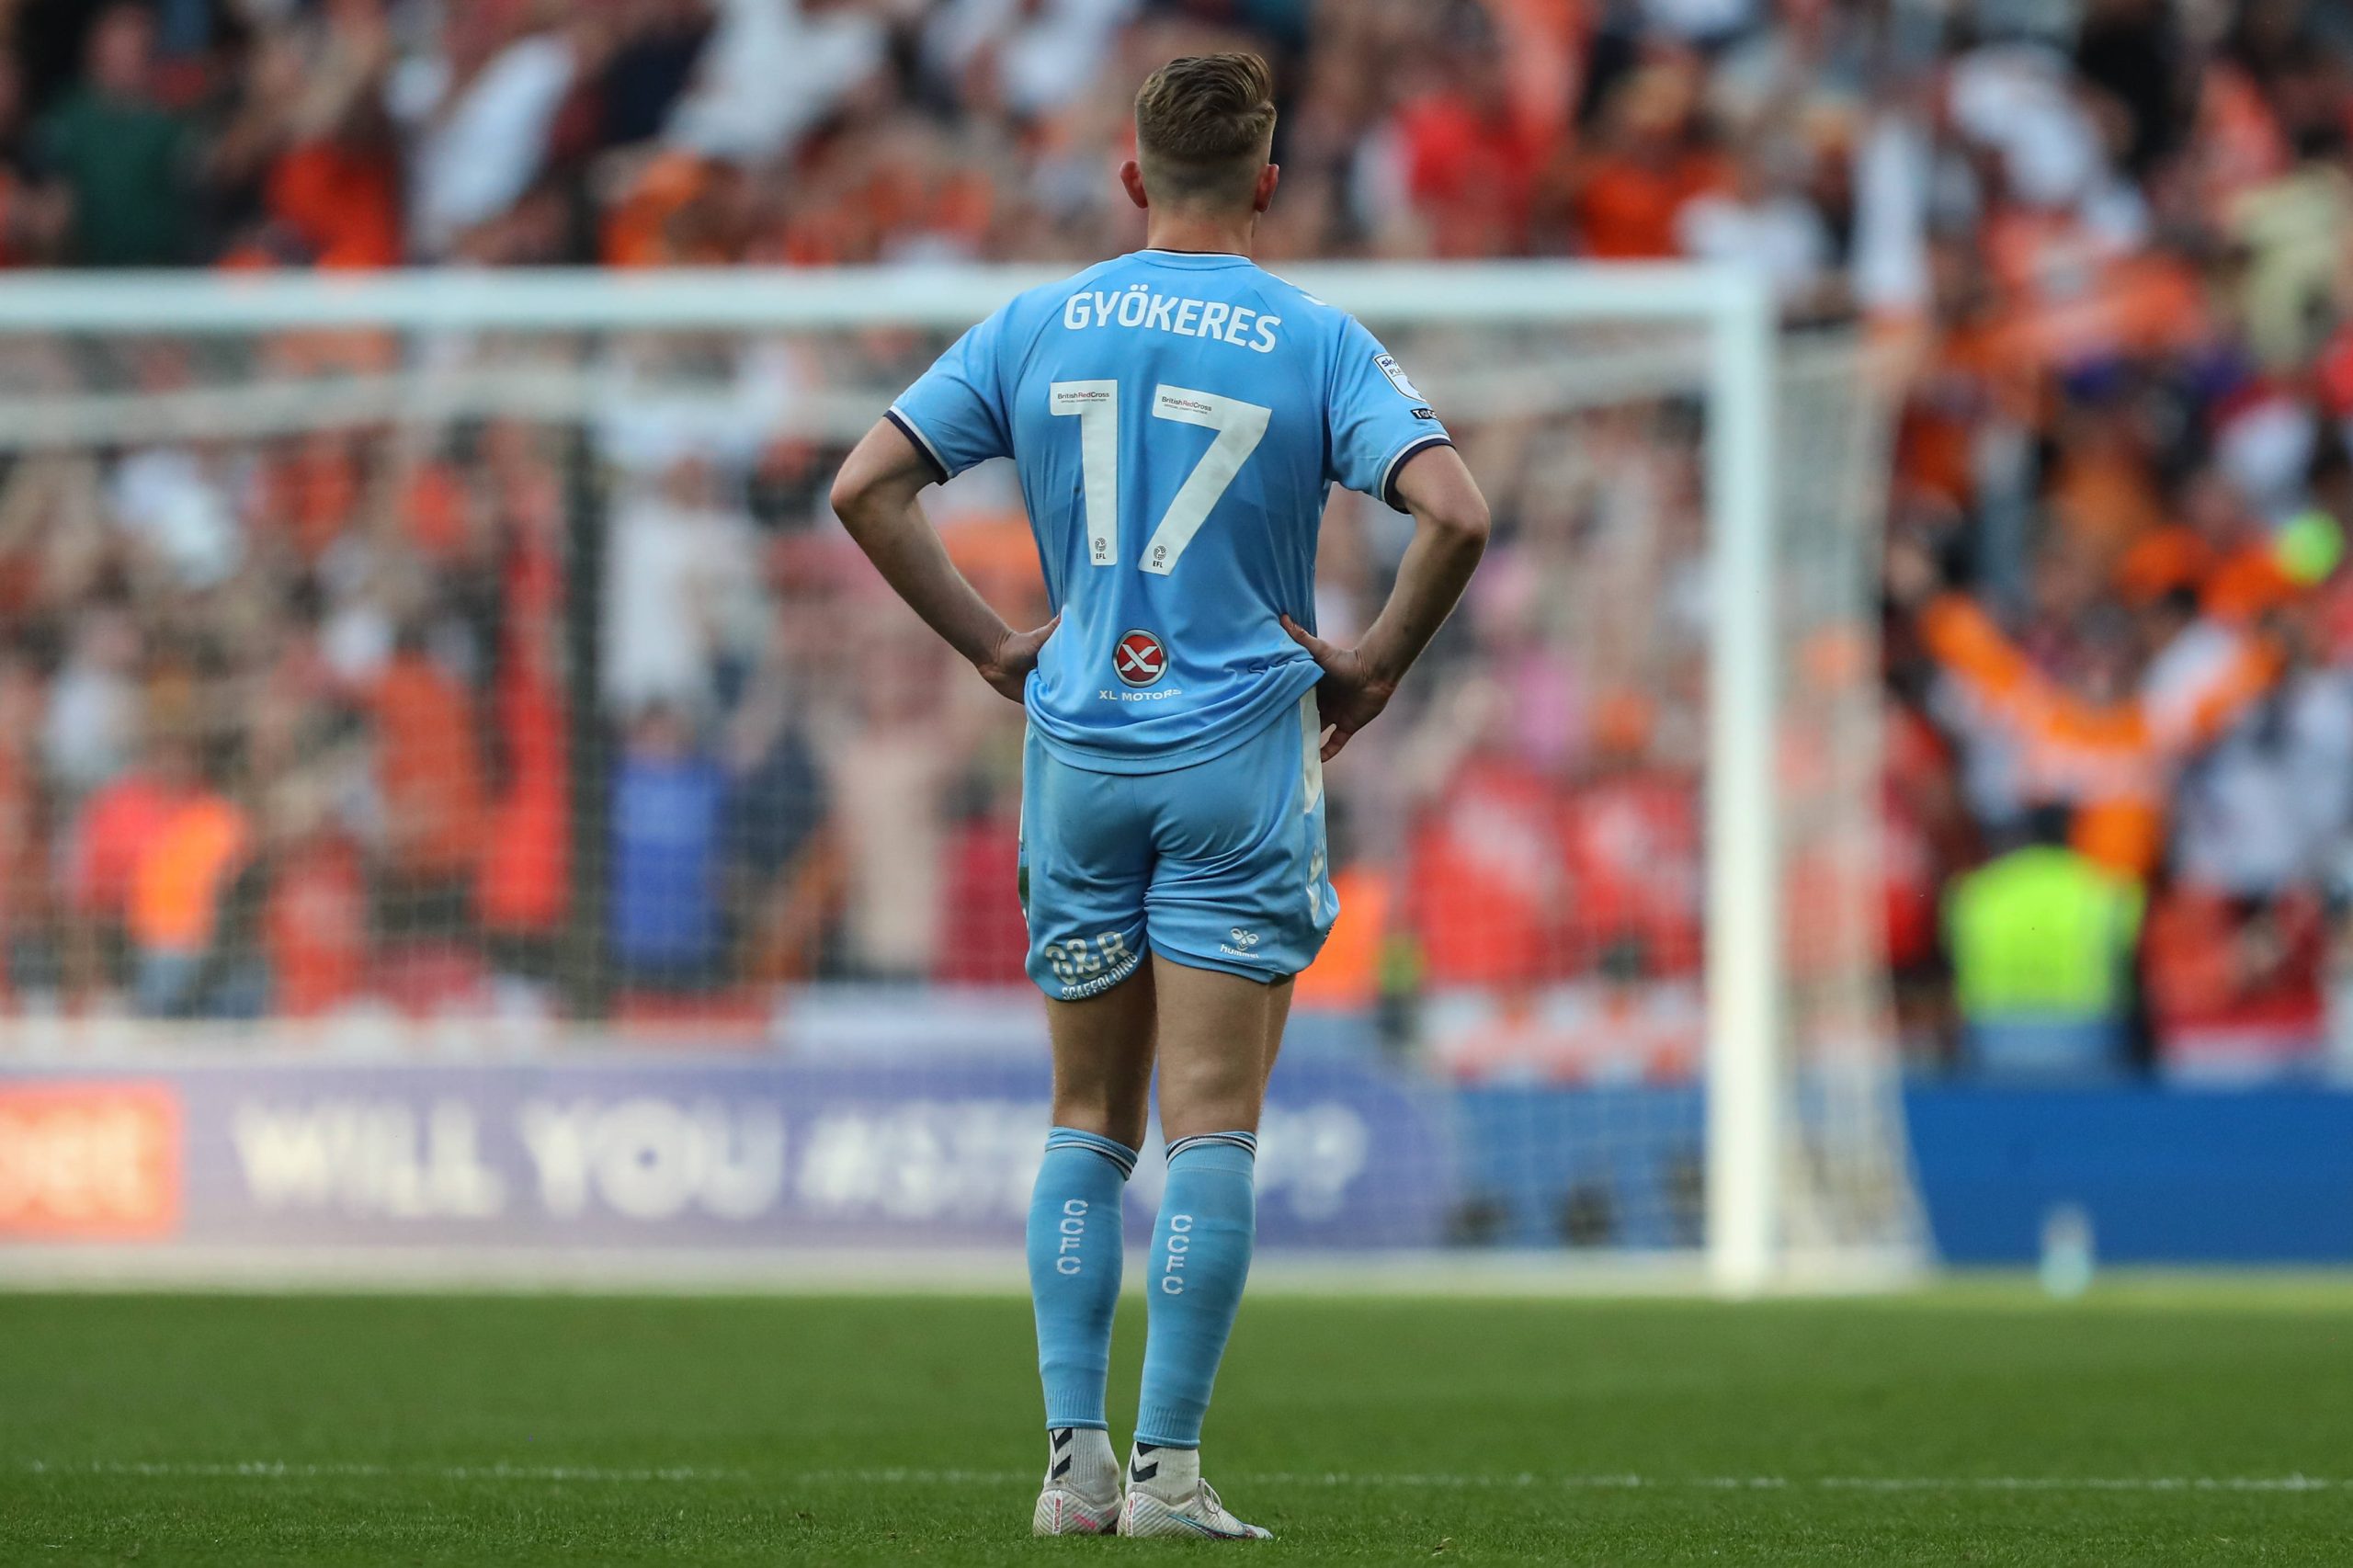 Sky Bet Championship Play-Off Final Coventry City v Luton Town Viktor Gyokeres 17 of Coventry City looks dejected during the Sky Bet Championship Play-Off Final match Coventry City vs Luton Town at Wembley Stadium, London, United Kingdom, 27th May 2023 Photo by Gareth Evans/News Images London Wembley Stadium Greater London United Kingdom Copyright: xGarethxEvans/NewsxImagesx